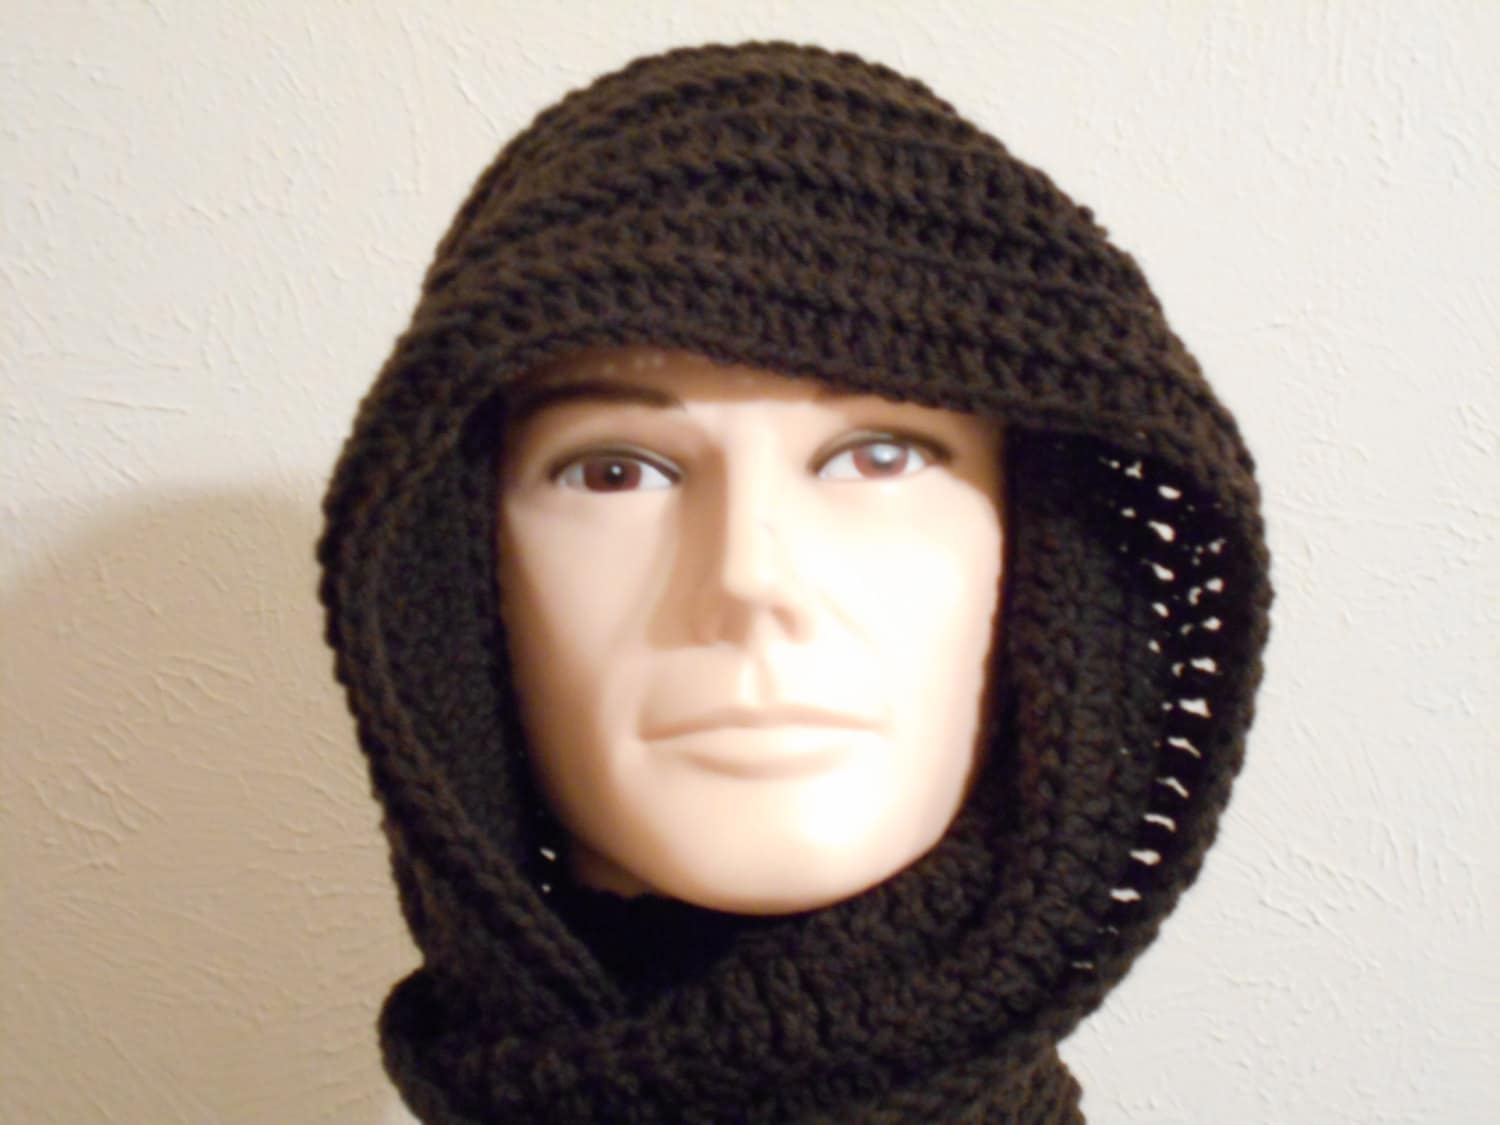 hooded scarf: NEW 541 HOODED SCARF MENS